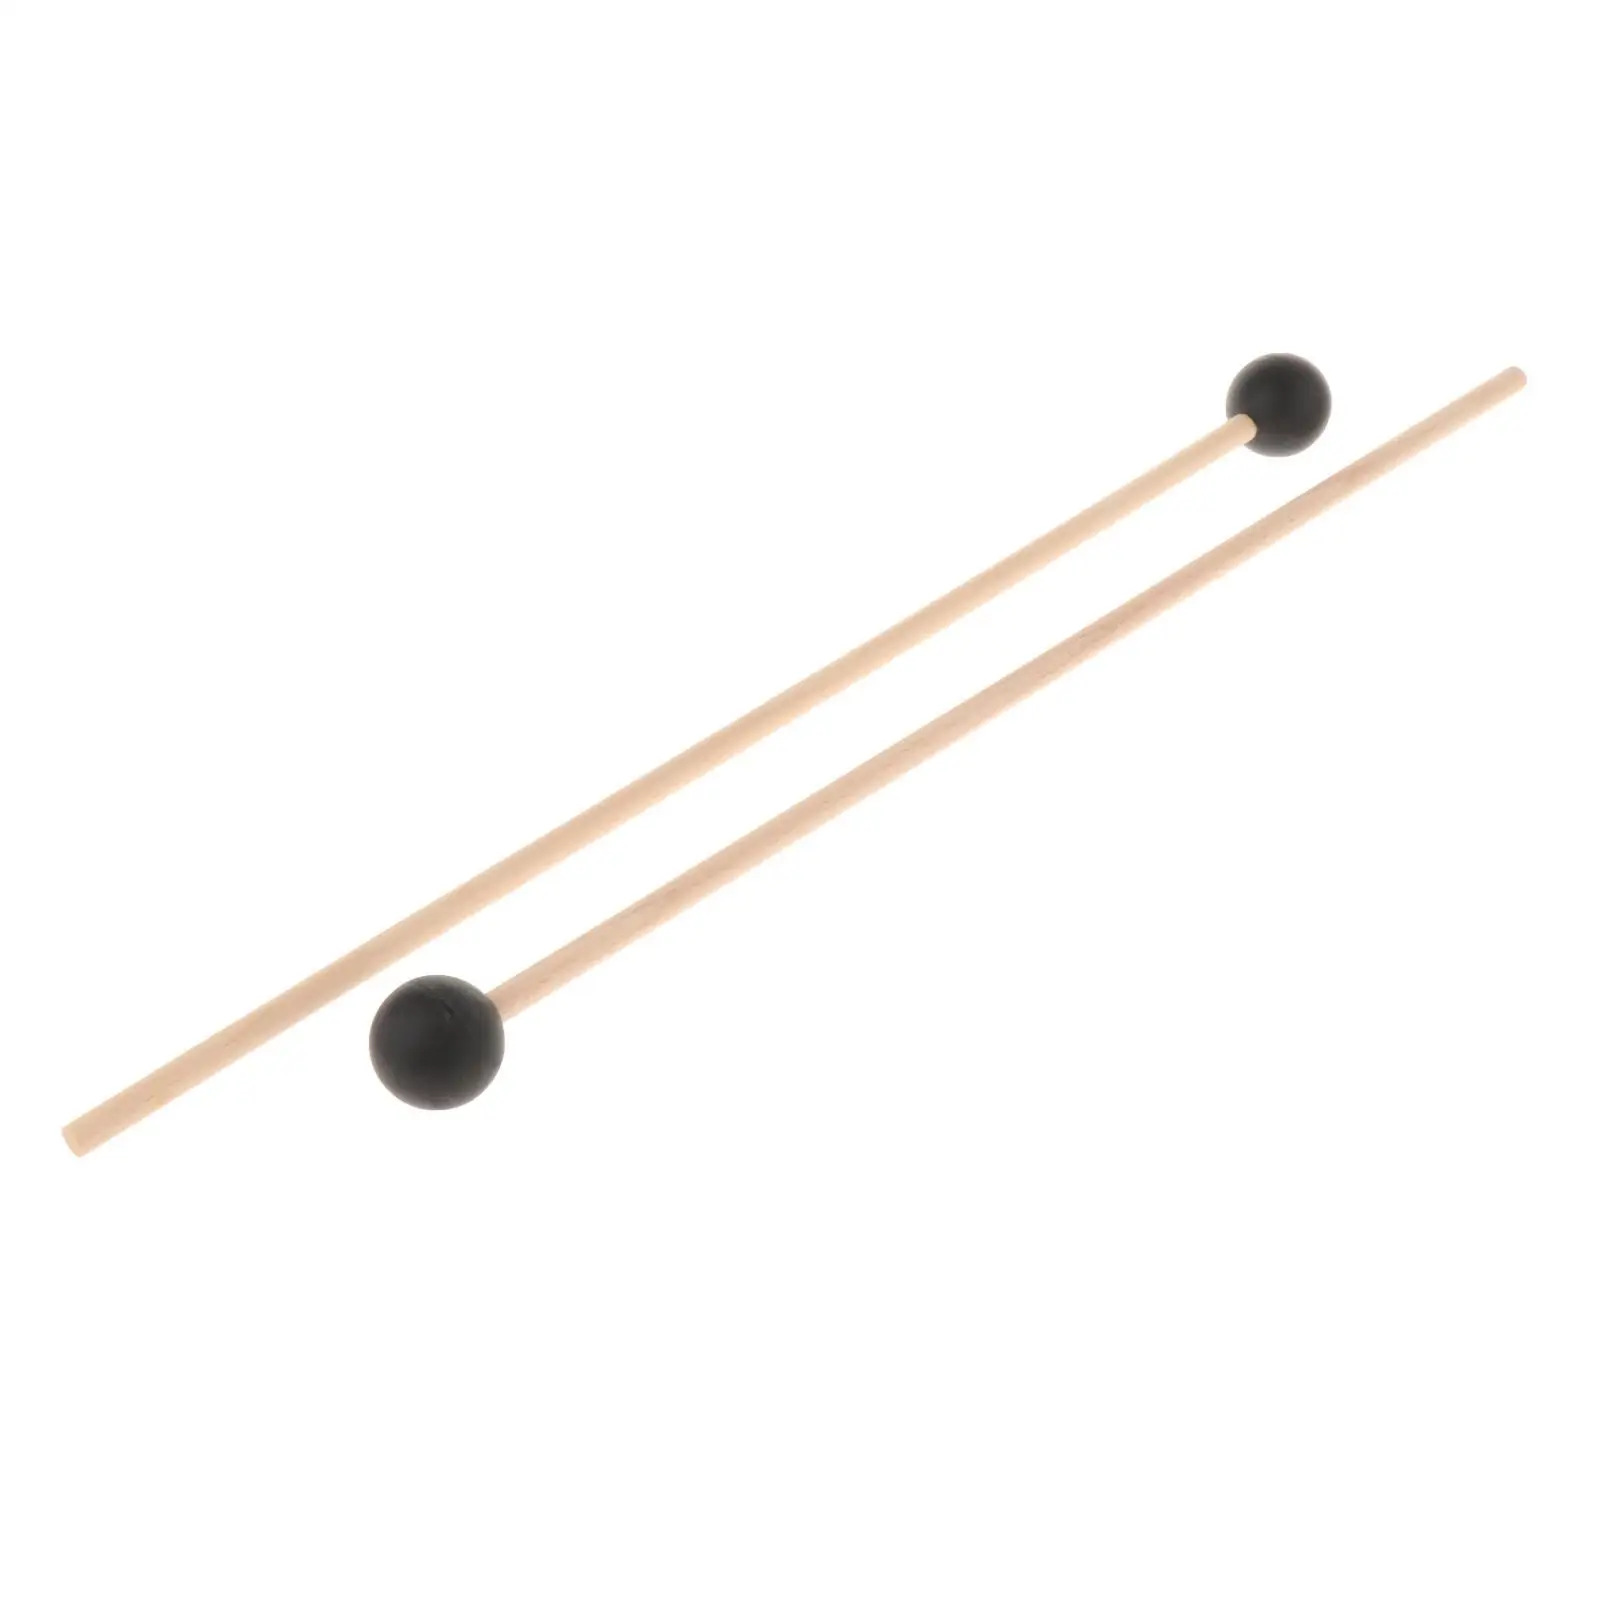 1 Pair Rubber Mallet Percussion Instrument Kit Marimba Mallets for Child Drummers